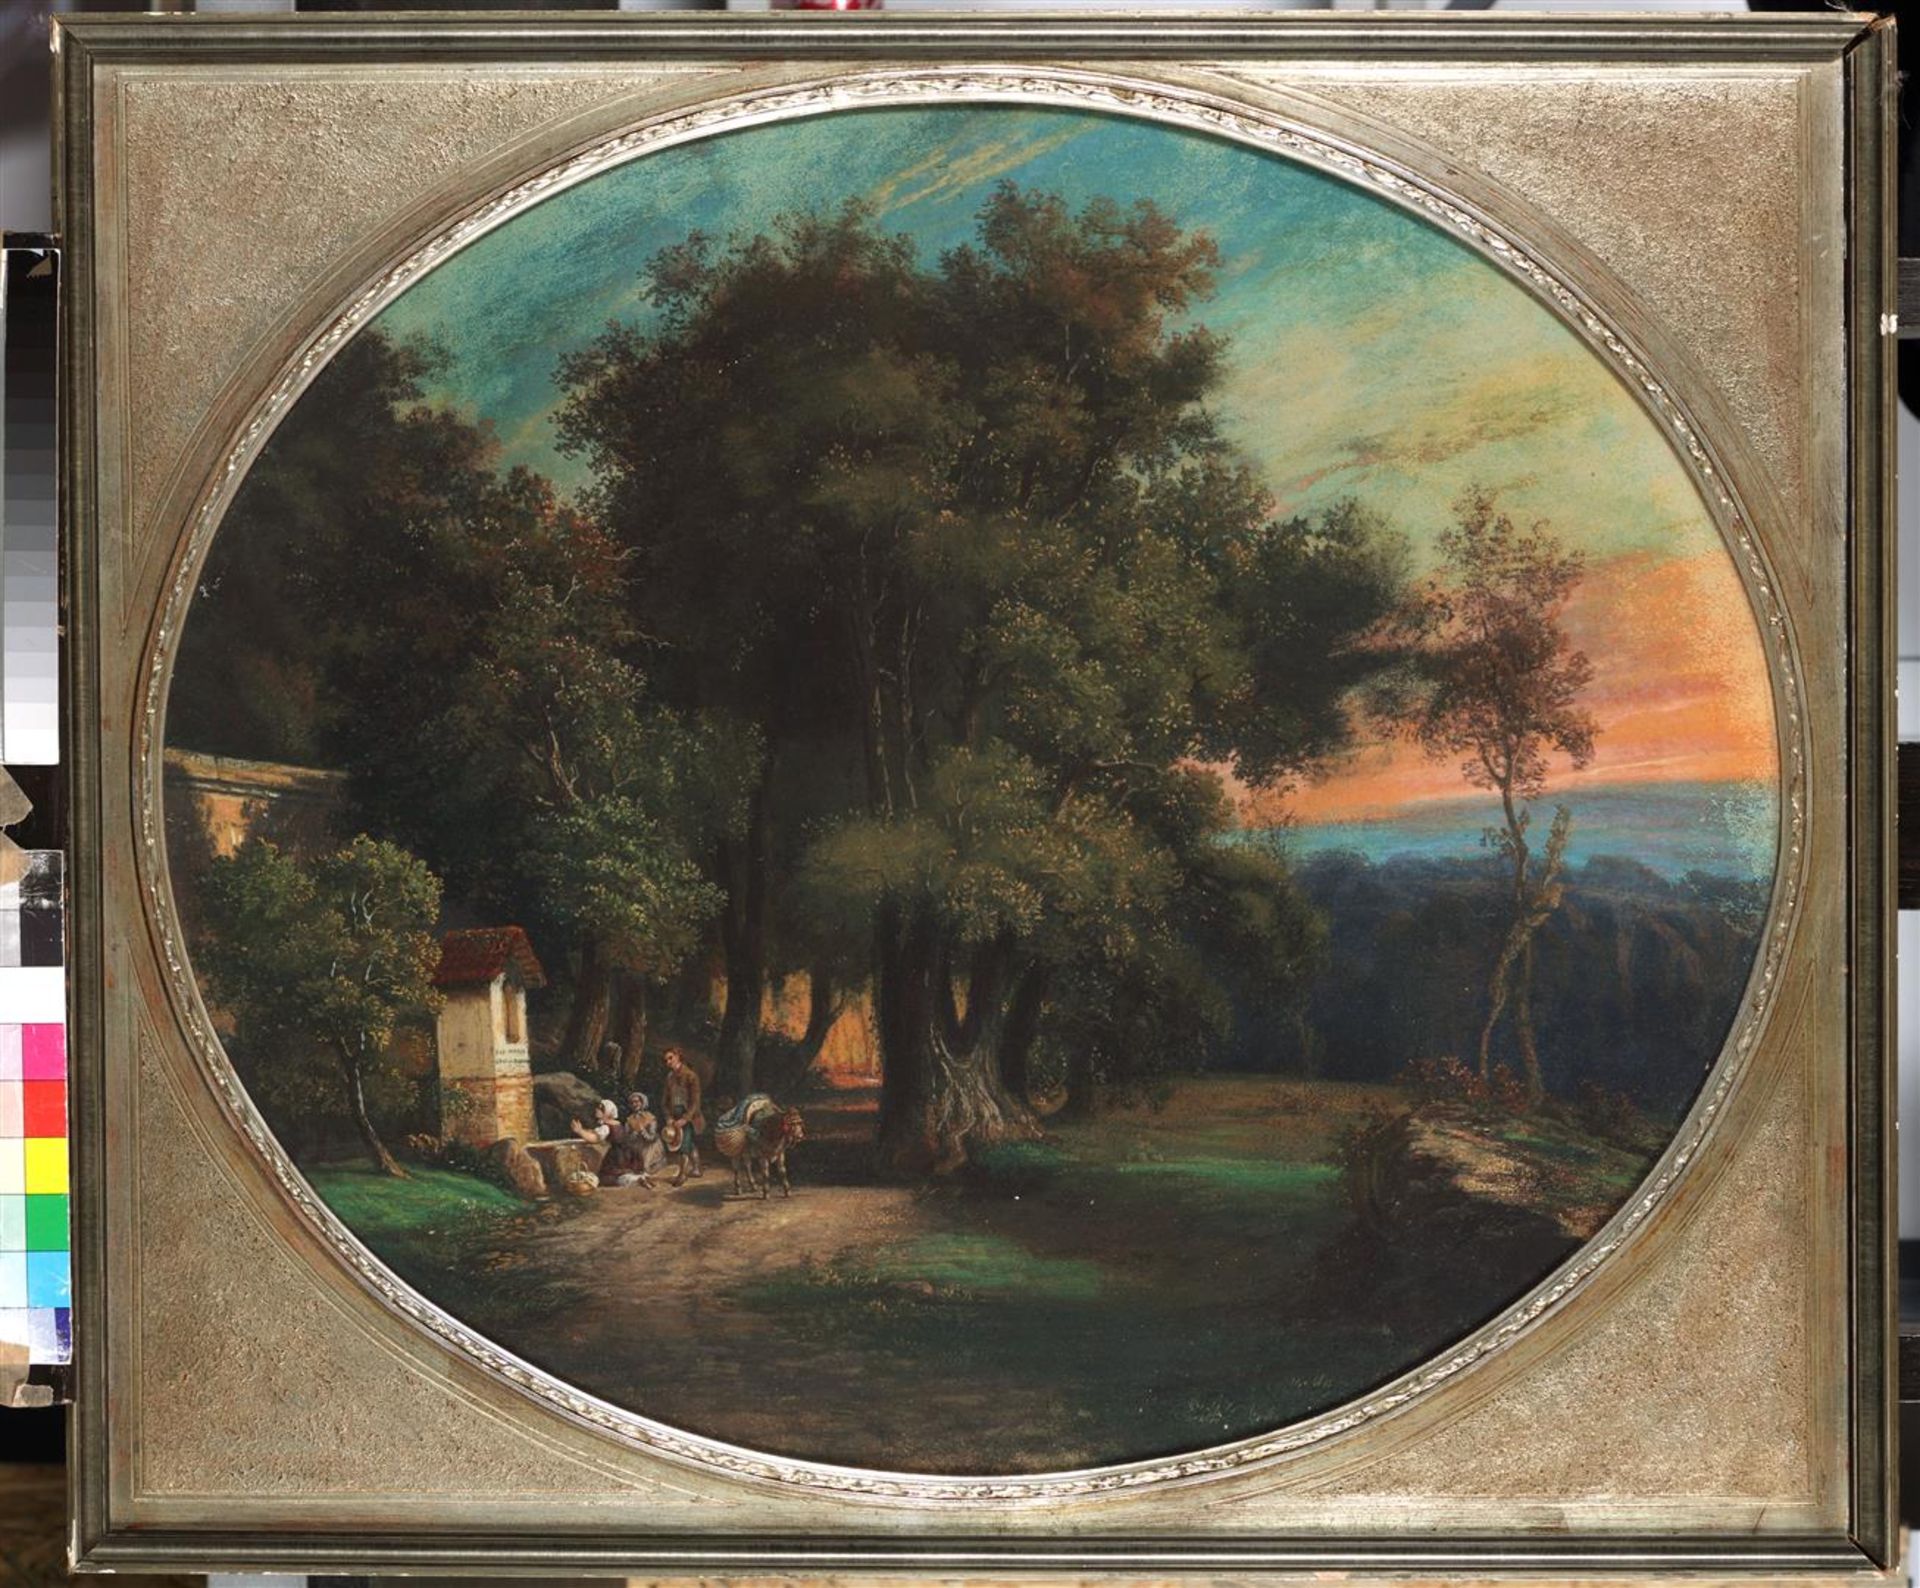 South German School, 19th century, Travellers in a landscap - Image 2 of 3